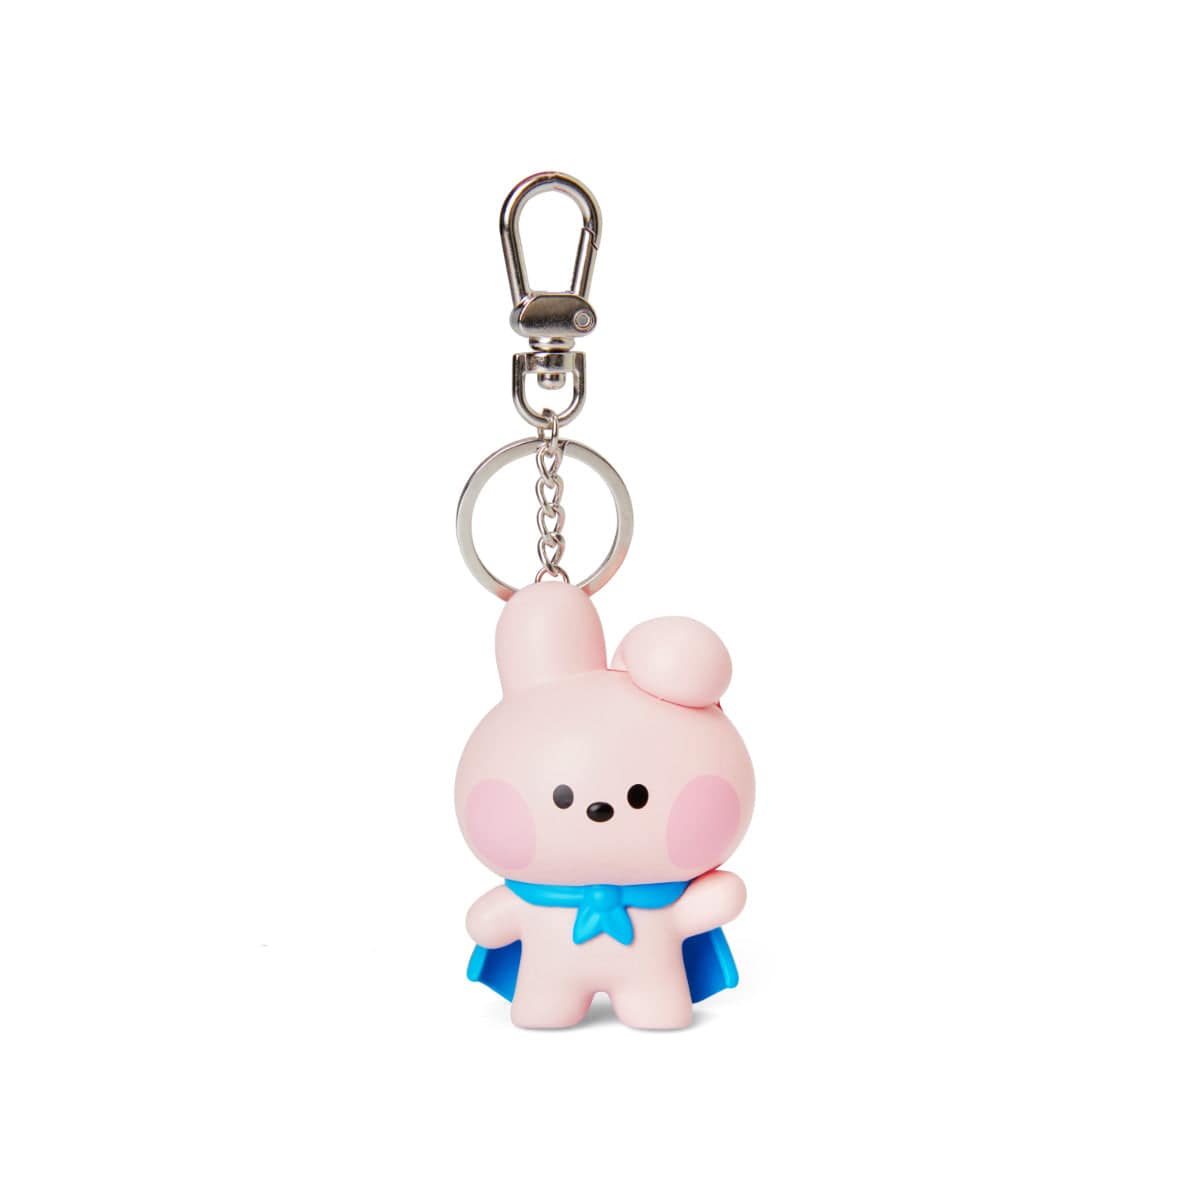 BT21 COOKY minini FIGURINE SOUND KEYRING – LINE FRIENDS COLLECTION